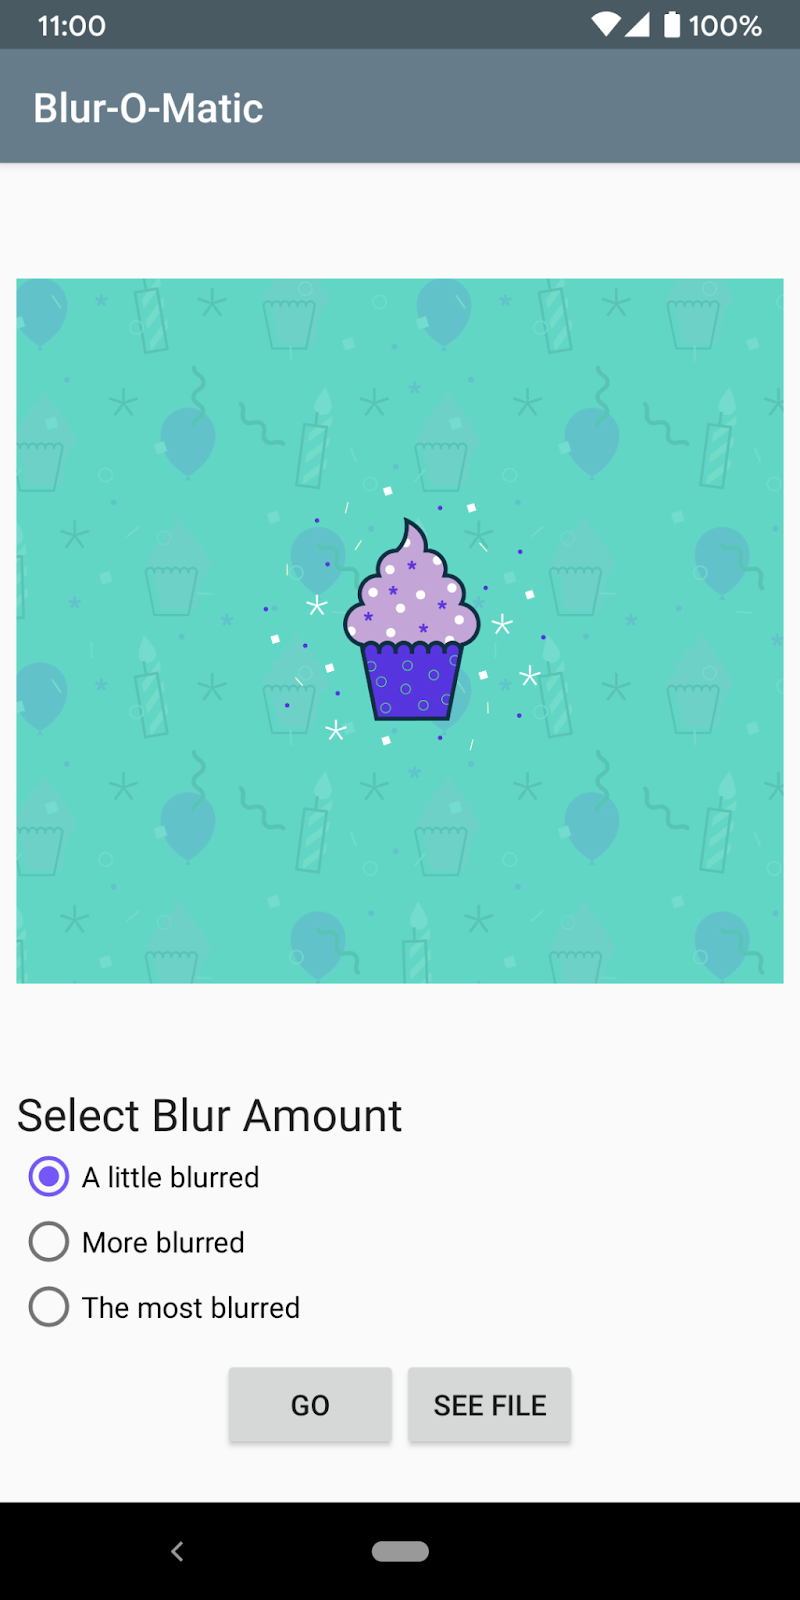 Image of app in completed state, with a placeholder image of the cupcake, 3 options for blurriness to apply on image, and 2 buttons. One to start blurring the image, and one to see the blurred image.